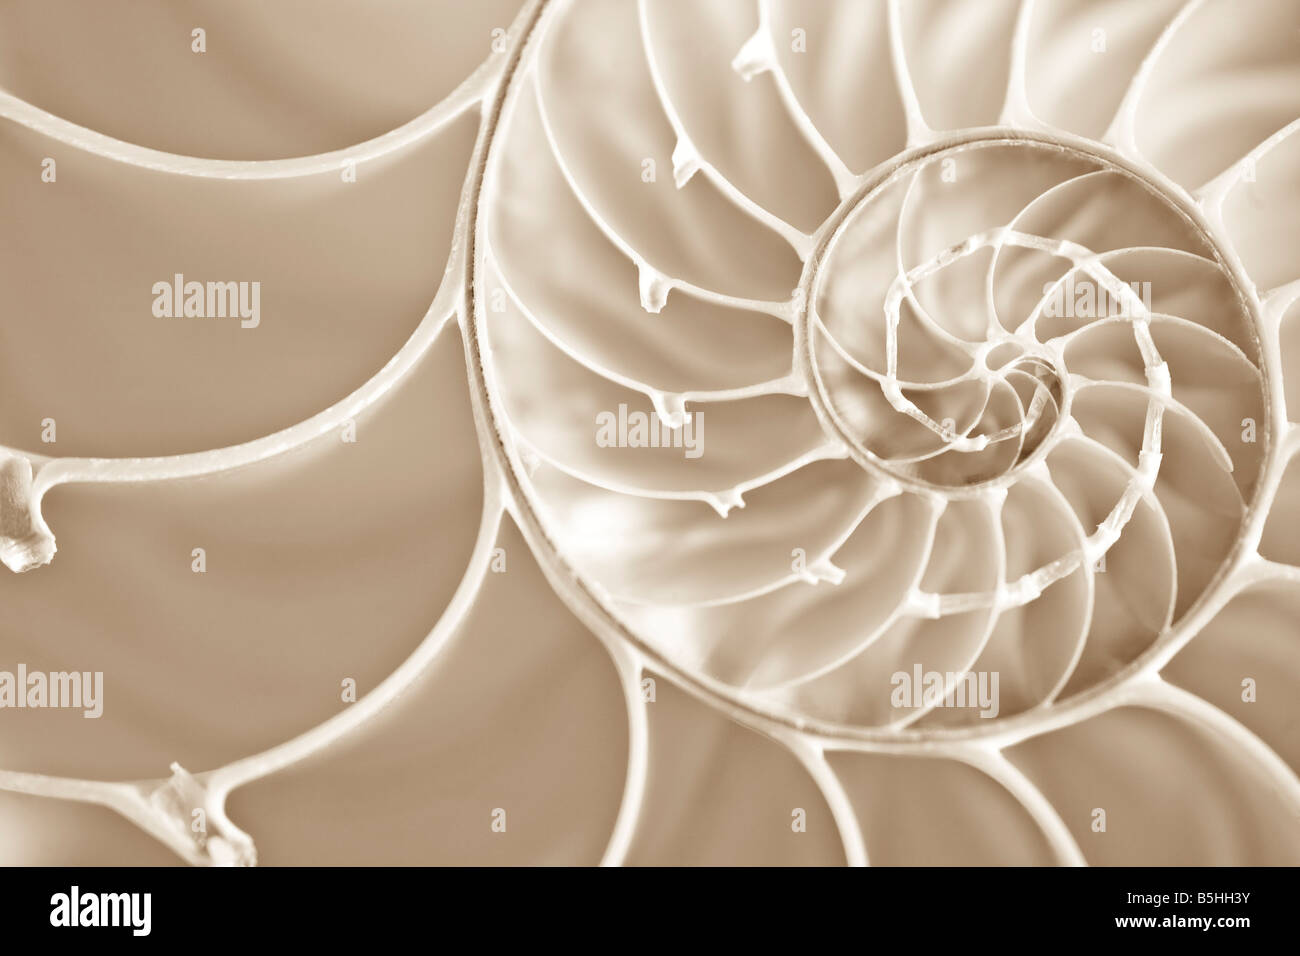 Macro image of cut away nautilus shell showing the golden section spiral and chambers inside Stock Photo